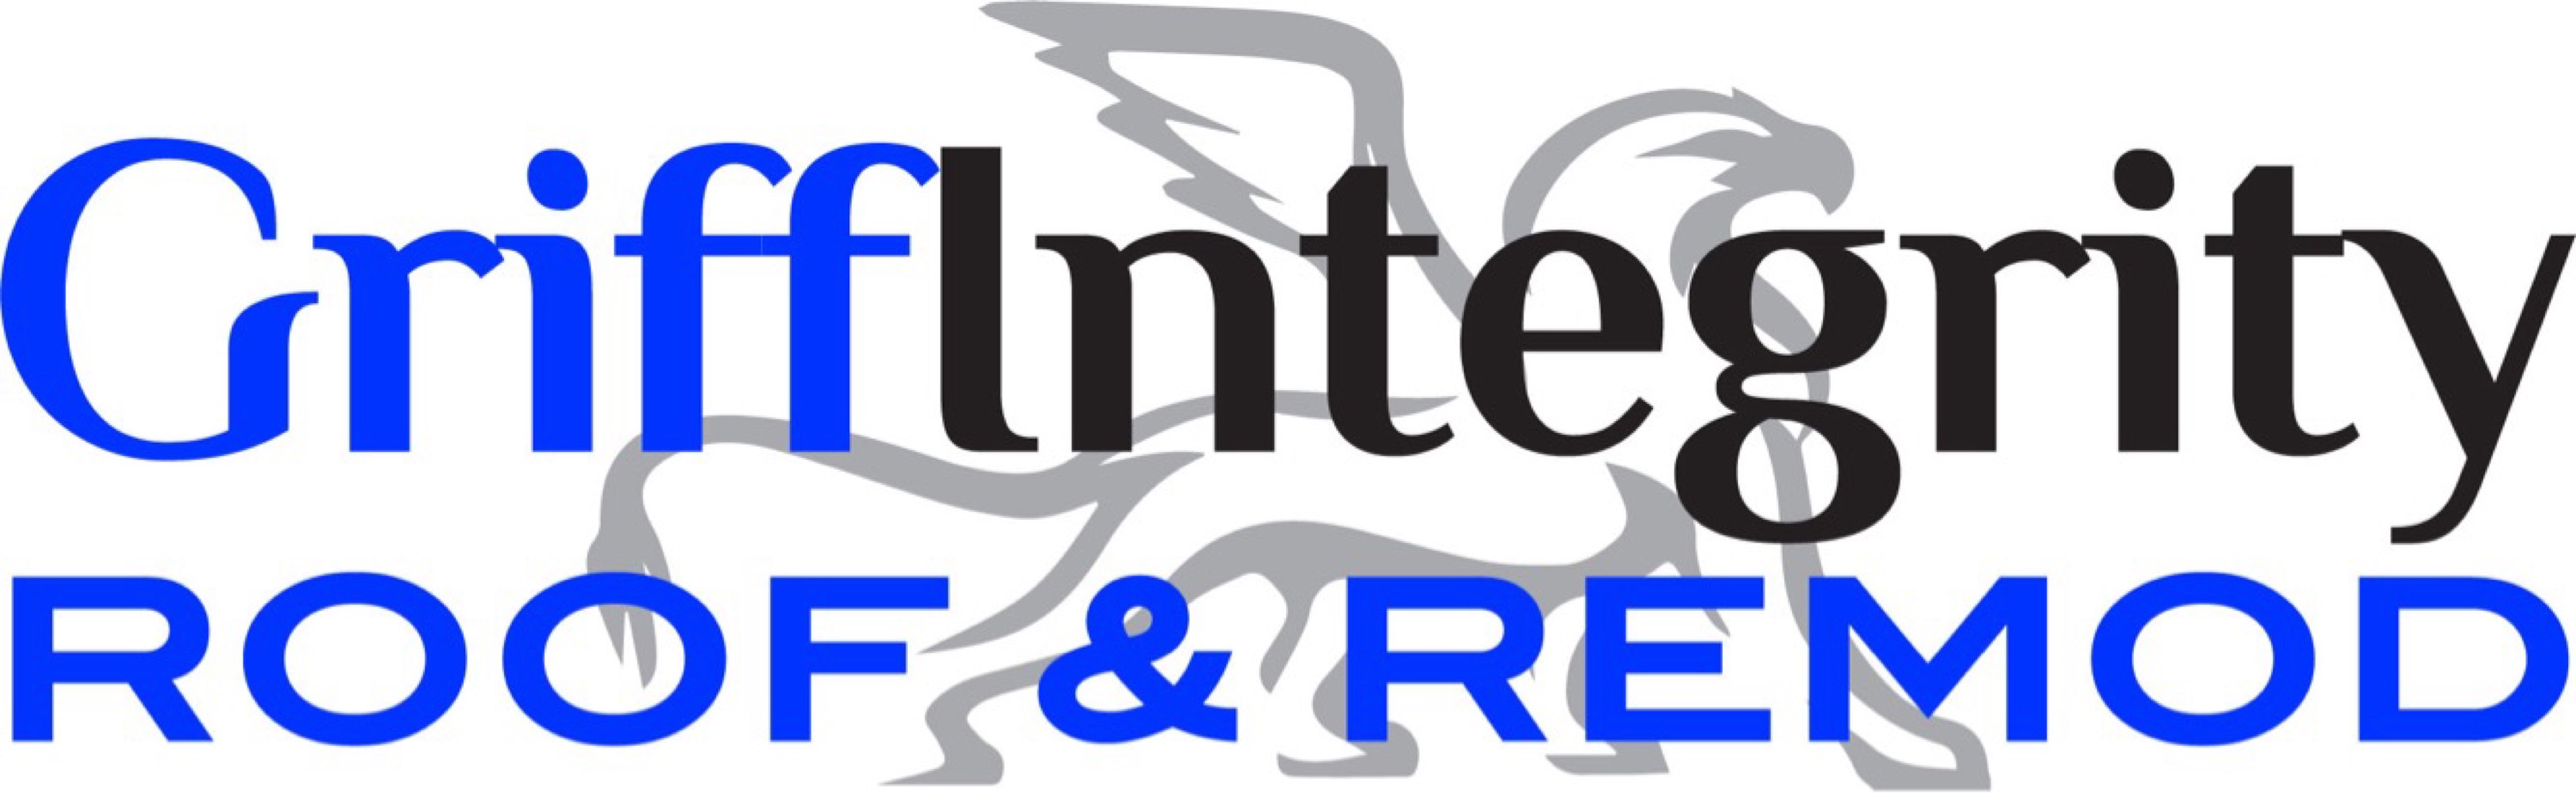 Griffintegrity Roof & Remod, Inc. Logo